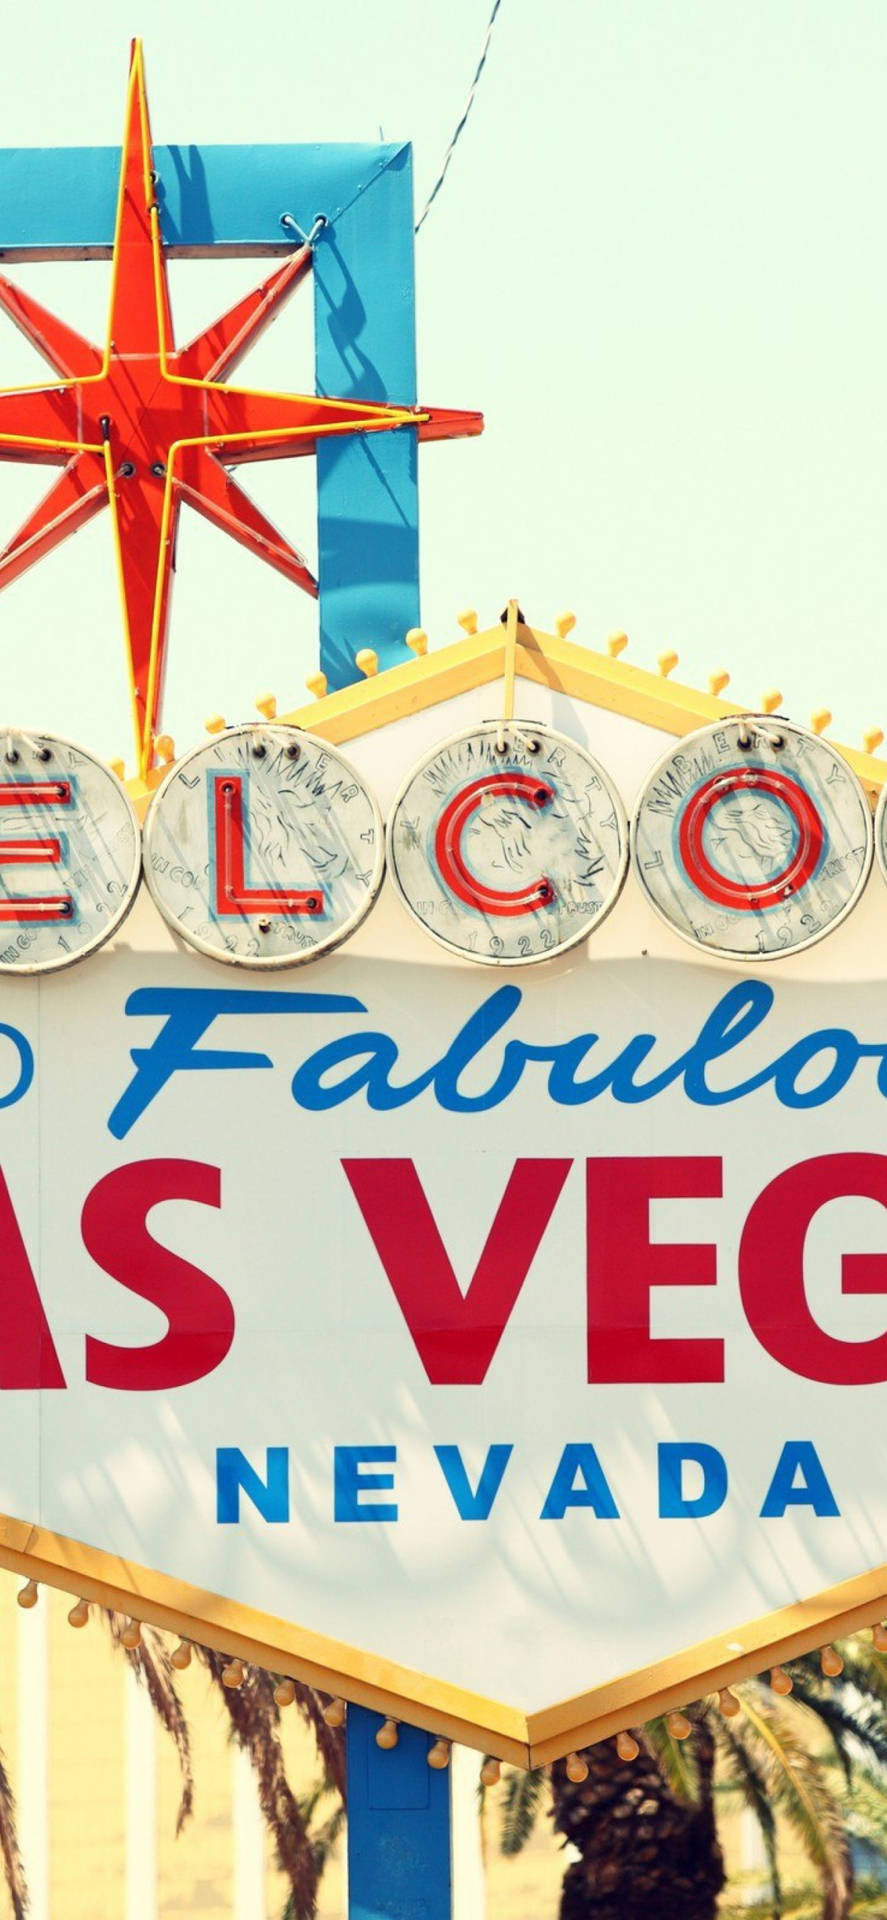 Welcome To Vegas Iphone Wallpaper